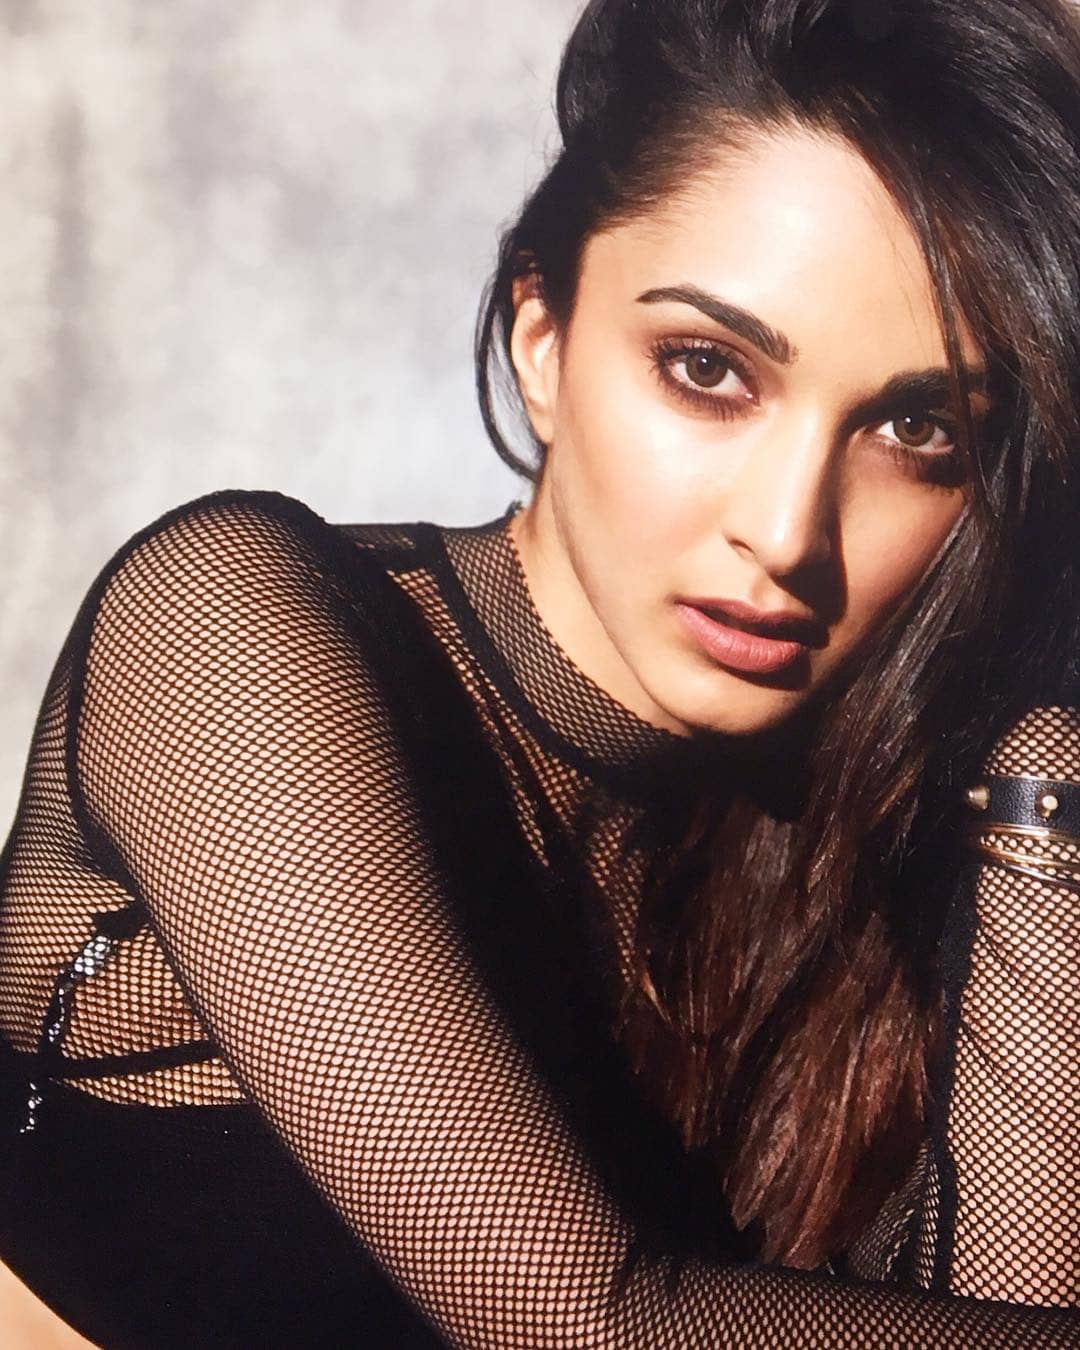 21 Photos Of Kiara Advani That Are A Feast For The Eyes 